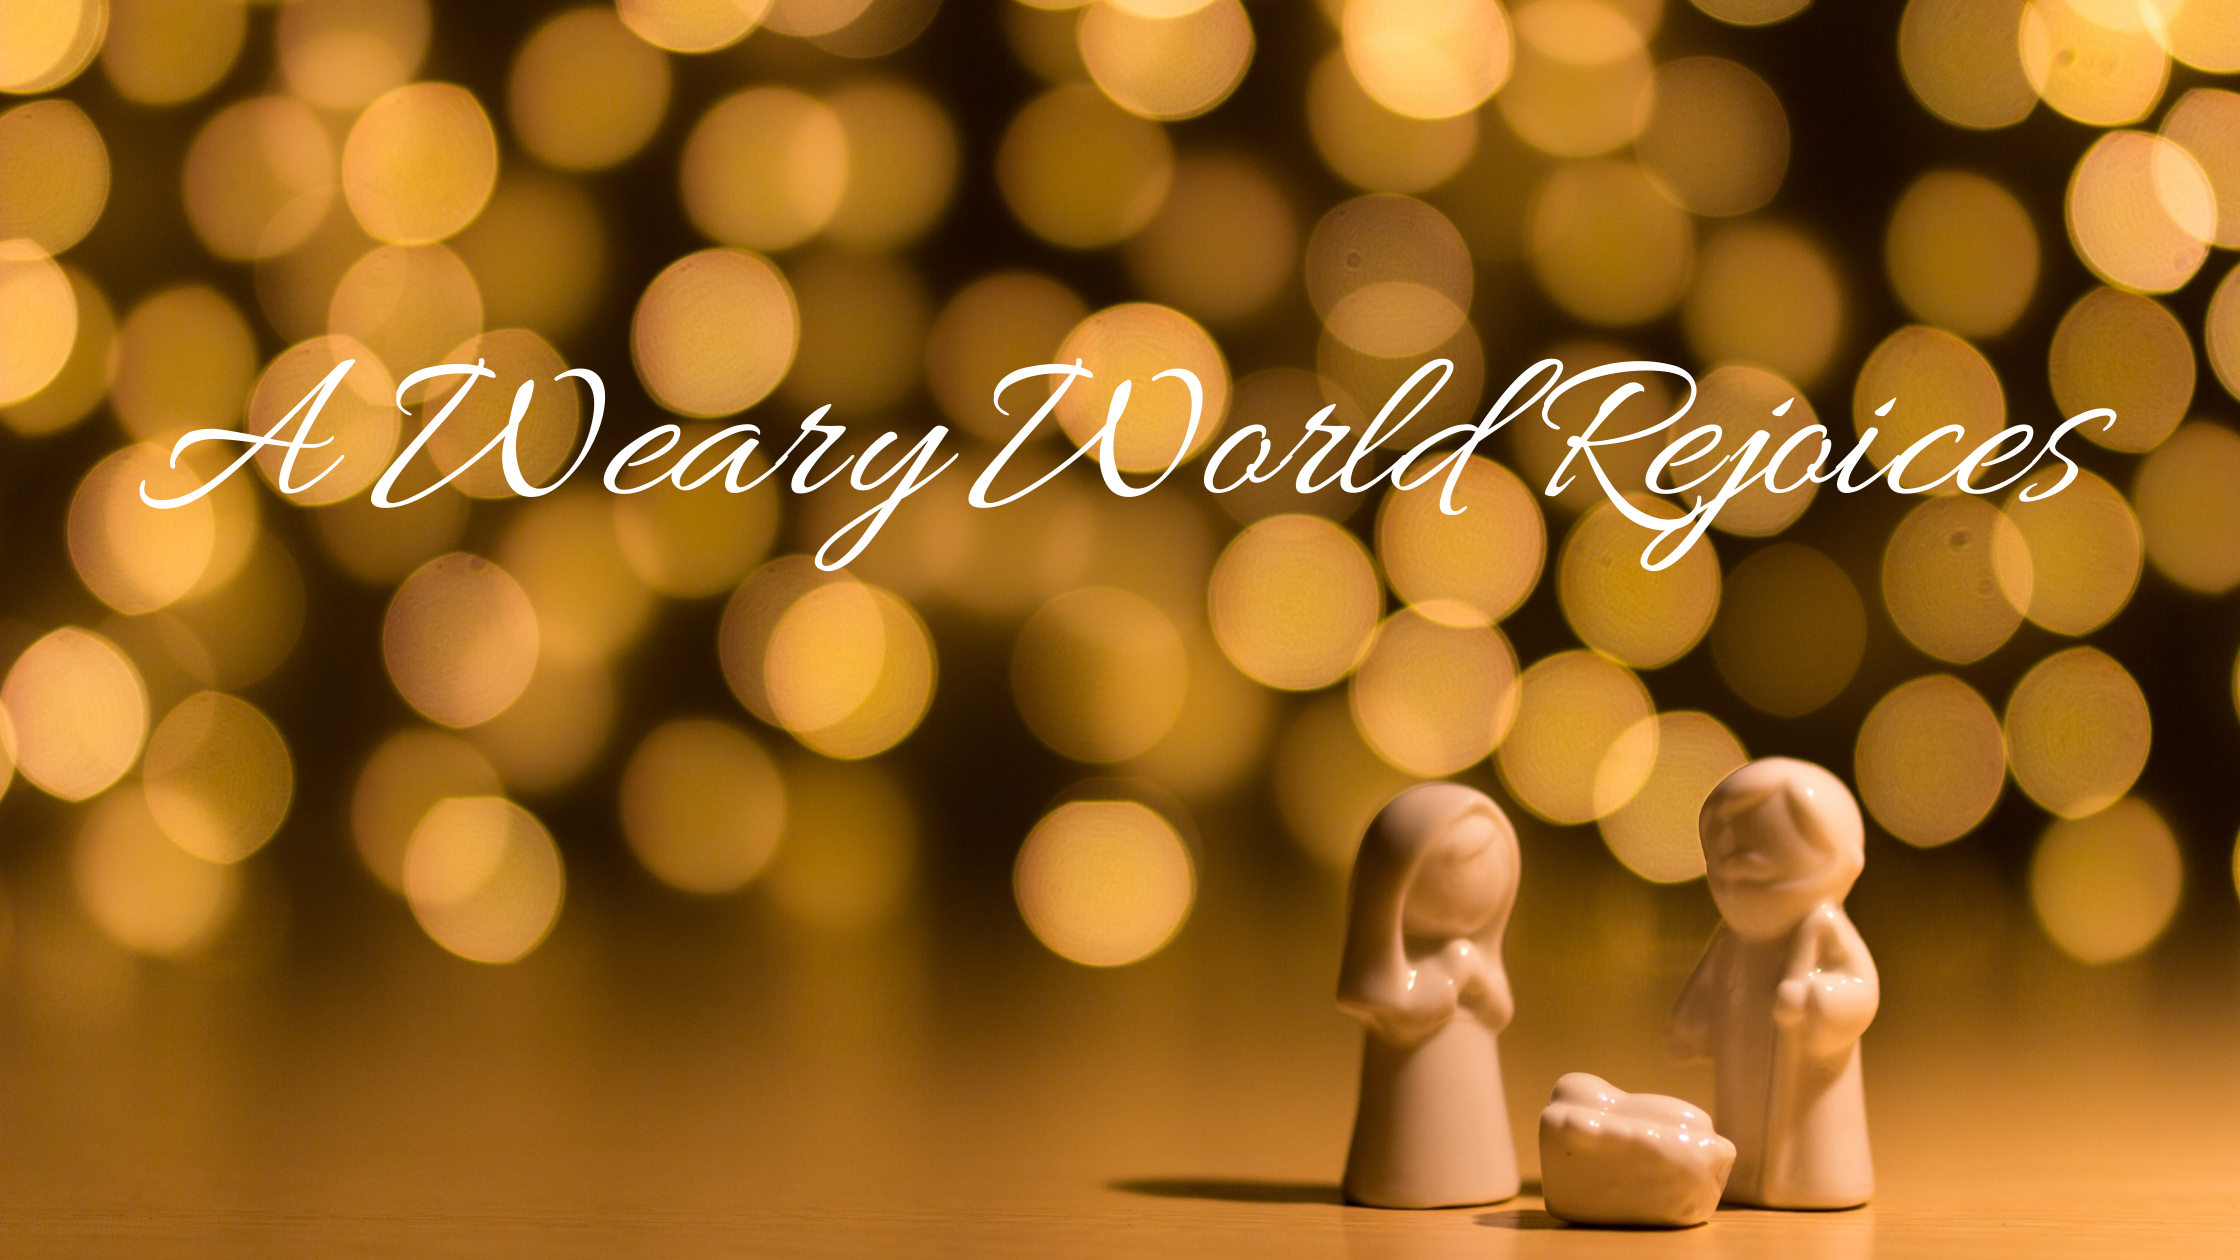 A Weary World Rejoices blog title with nativity background